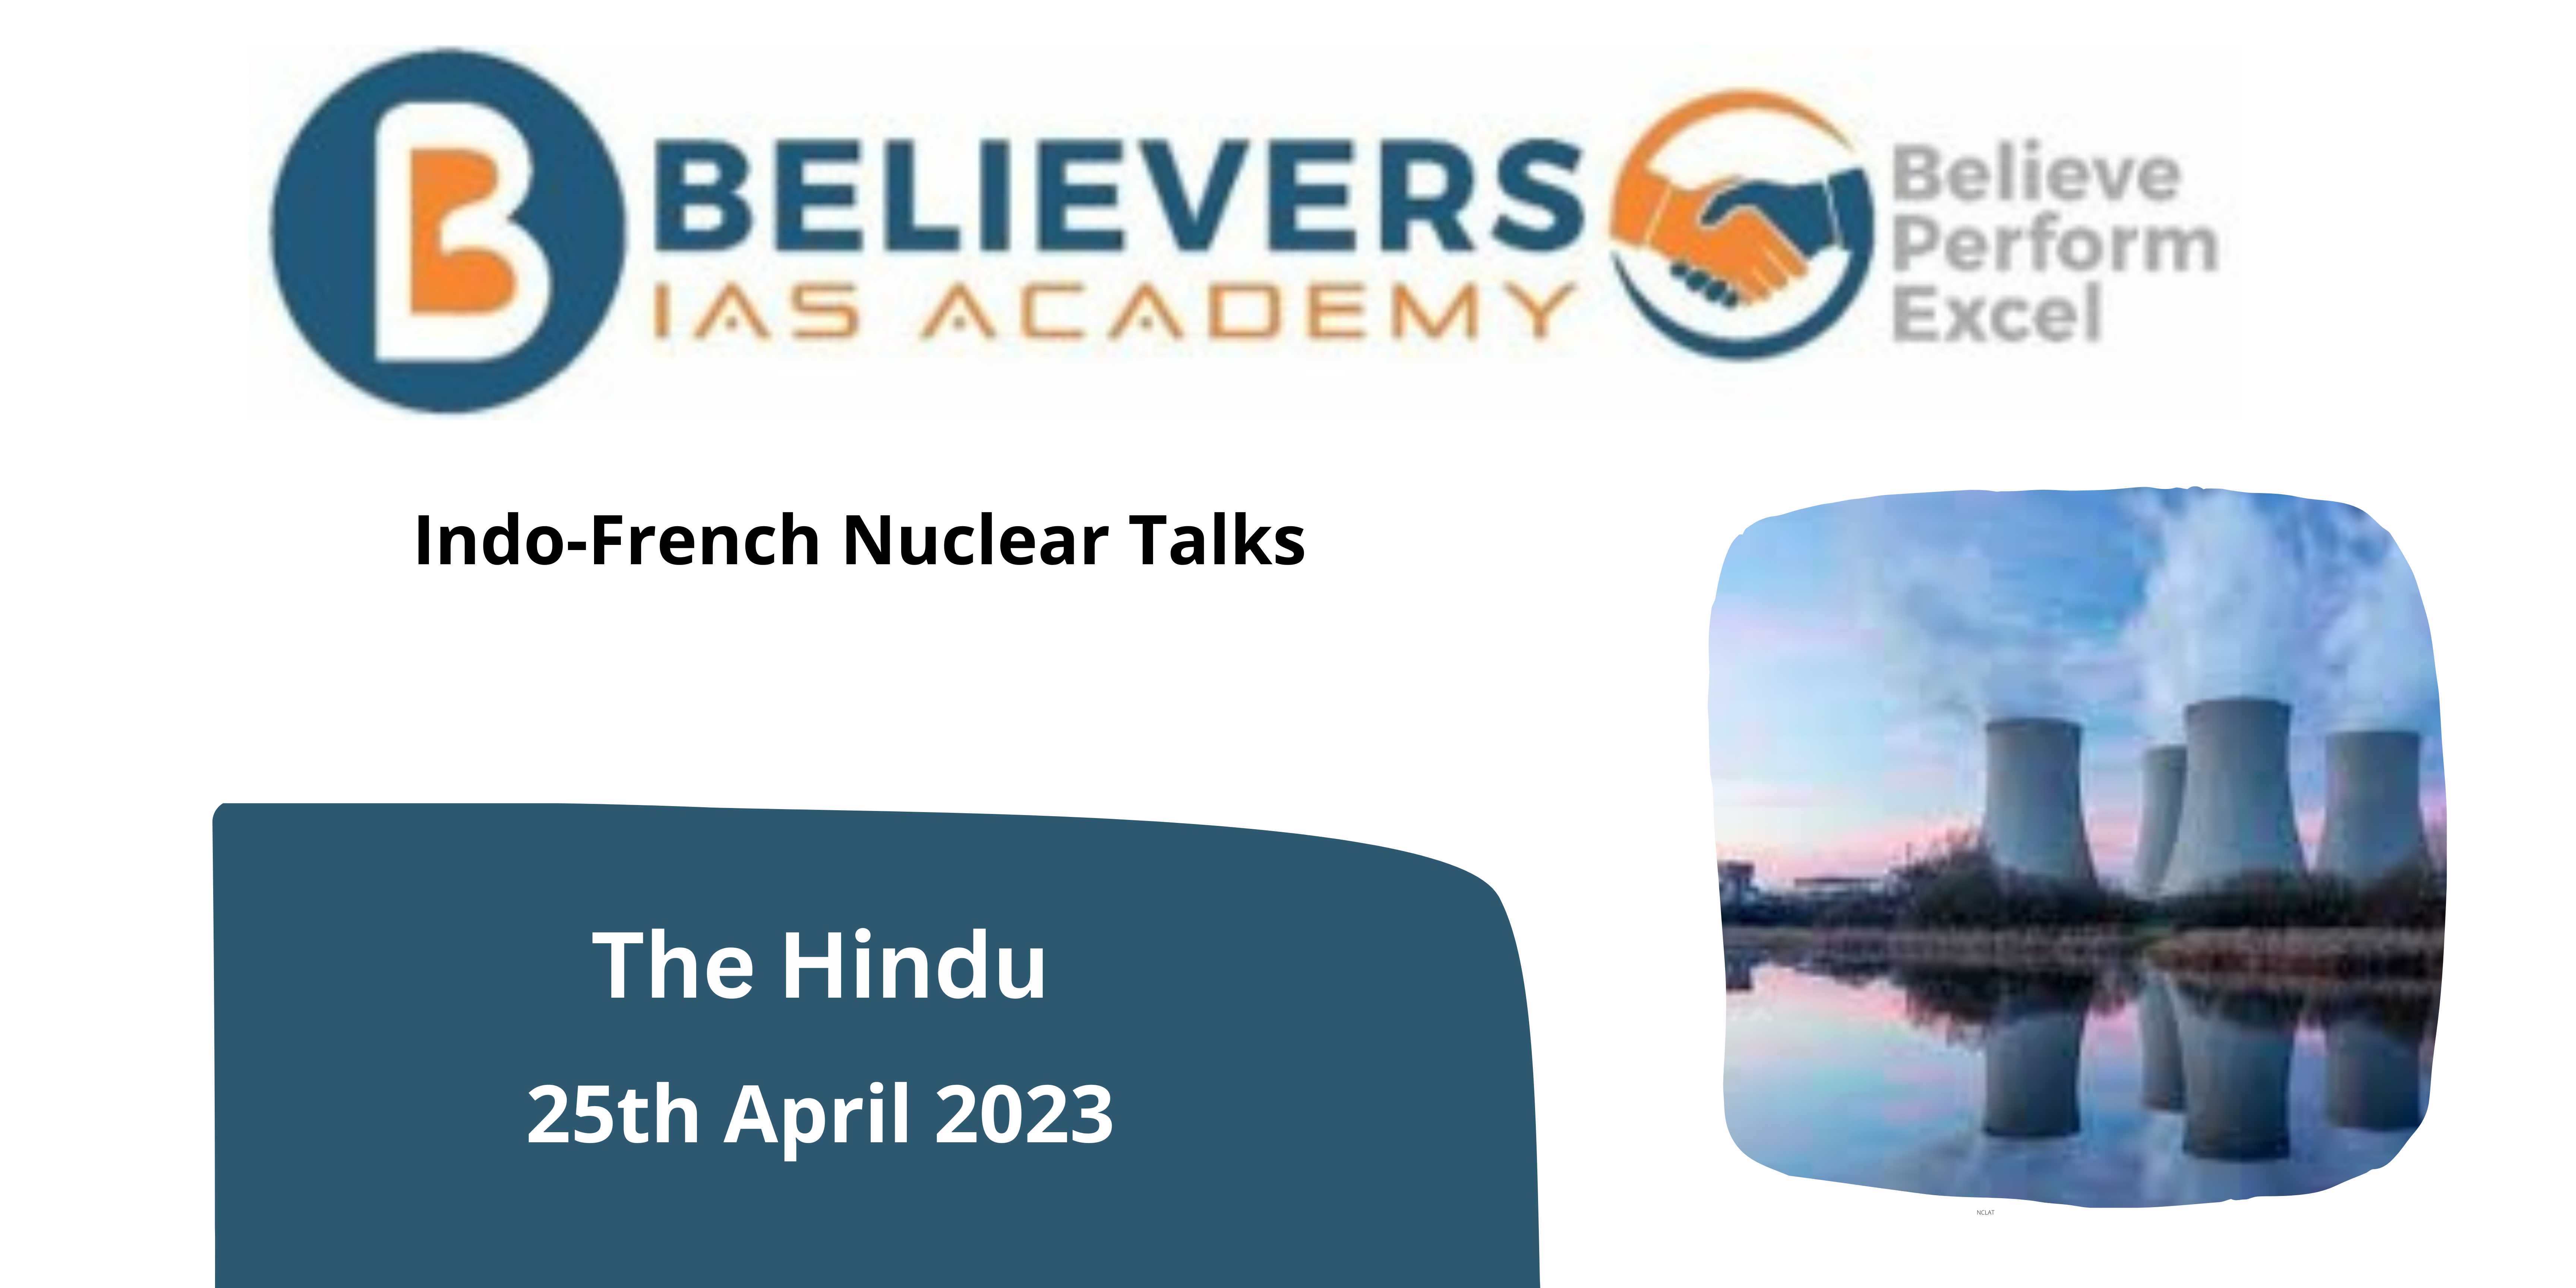 Indo-French Nuclear Talks